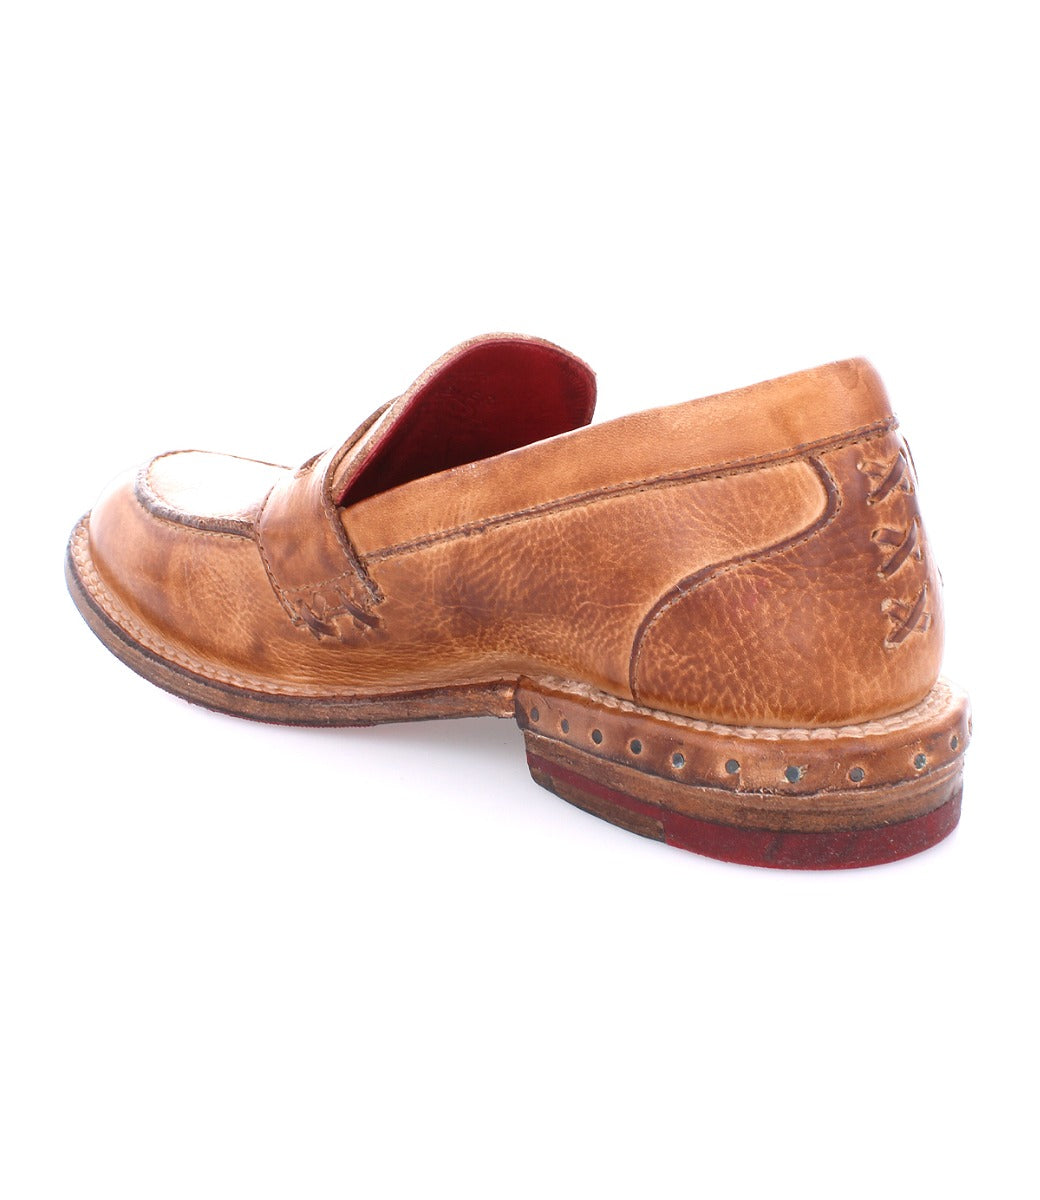 A women's brown loafer with studded soles called Reina by Bed Stu.